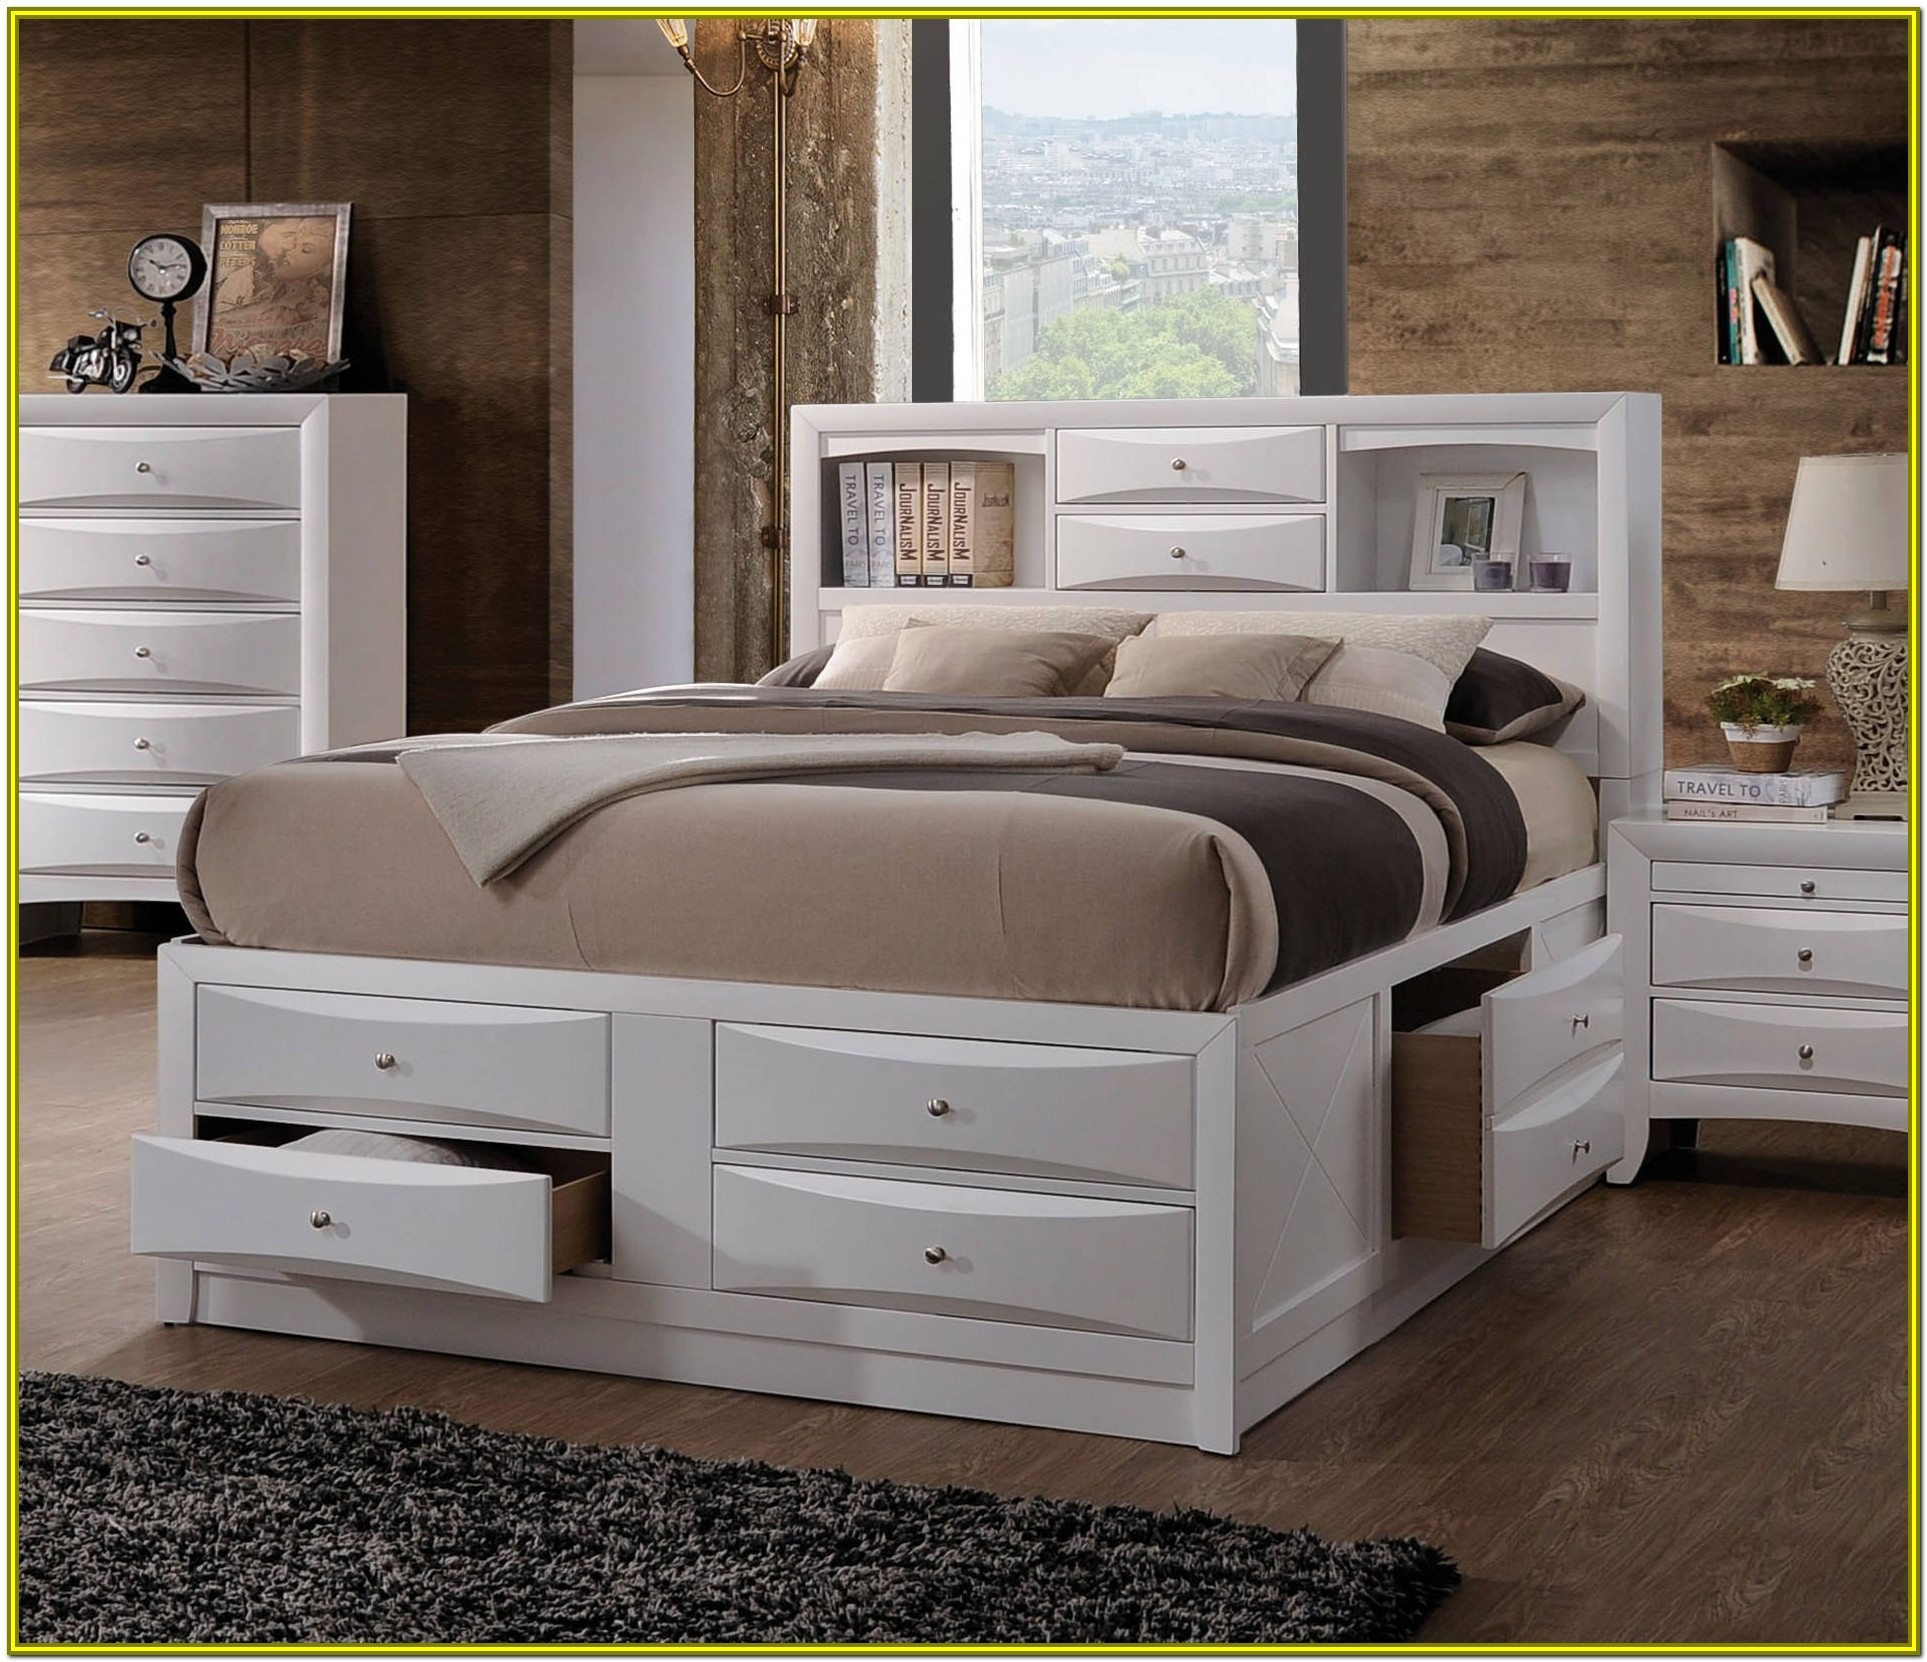 Platform Bed With Drawers Visualhunt, 12 Drawer King Bed